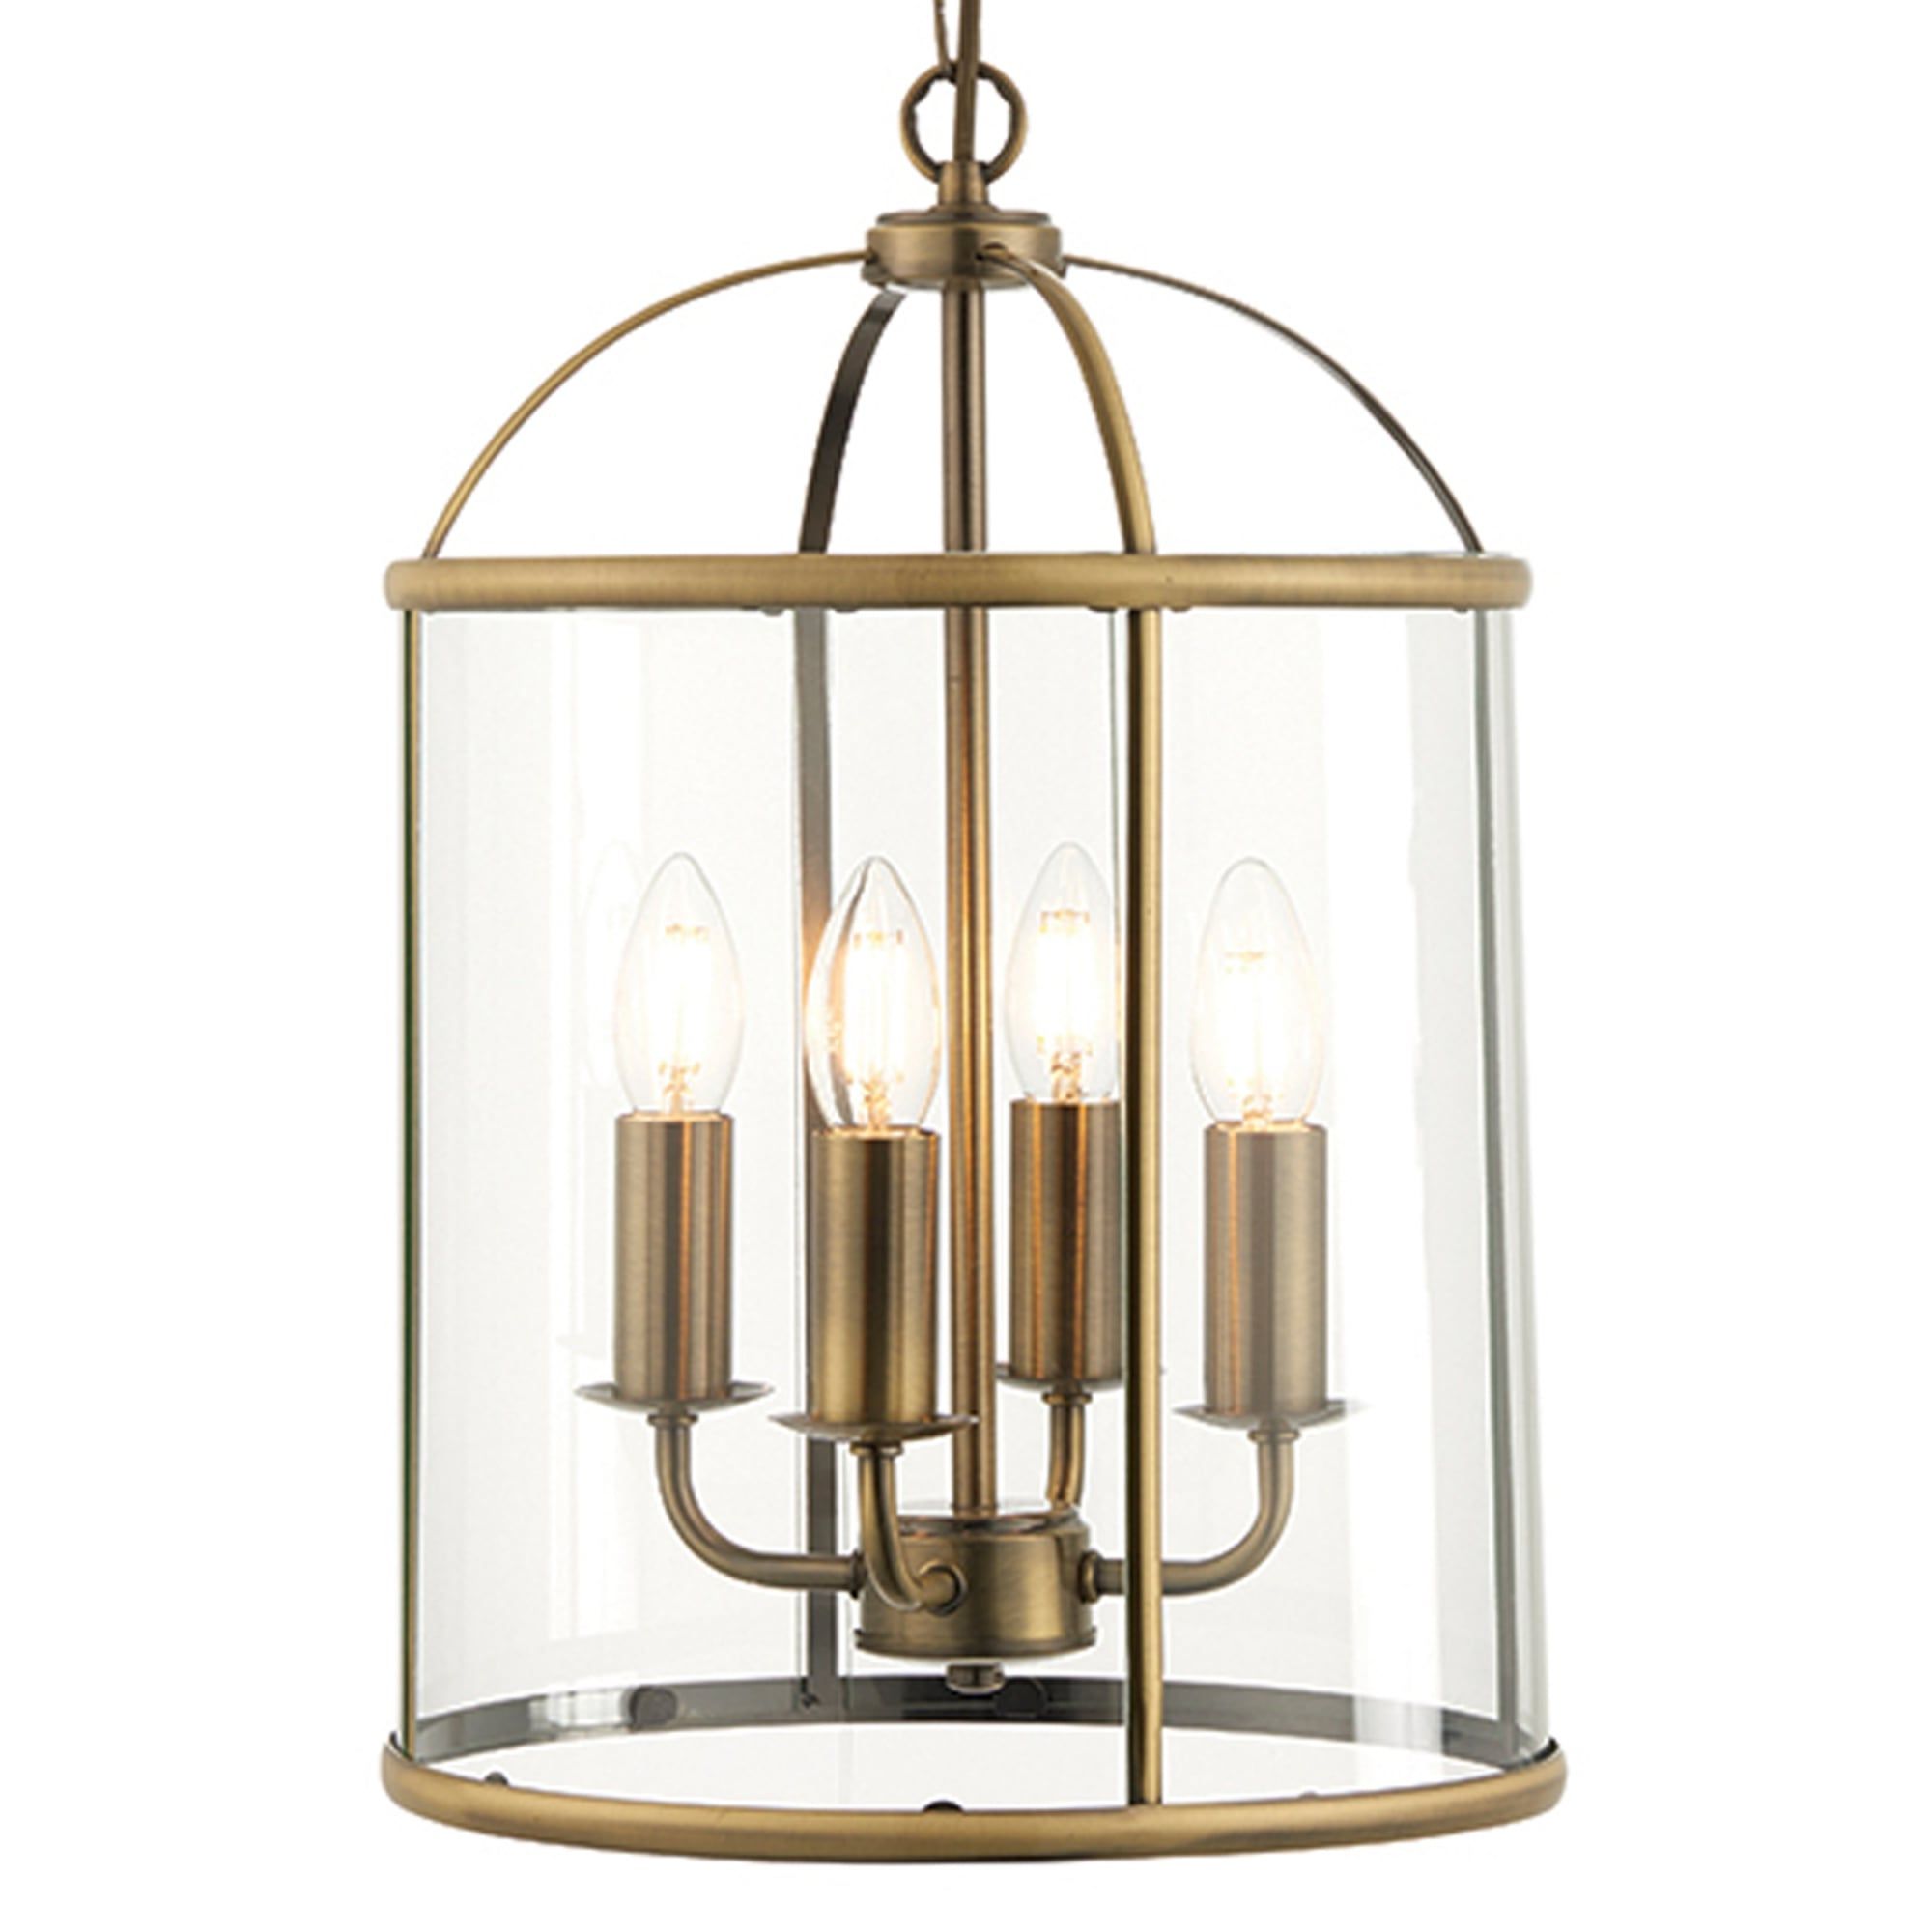 Most Recent Aged Brass Lantern Chandeliers Inside Endon 69455 Lambeth 4 Light Antique Brass And Glass Lantern Pendant (View 10 of 10)